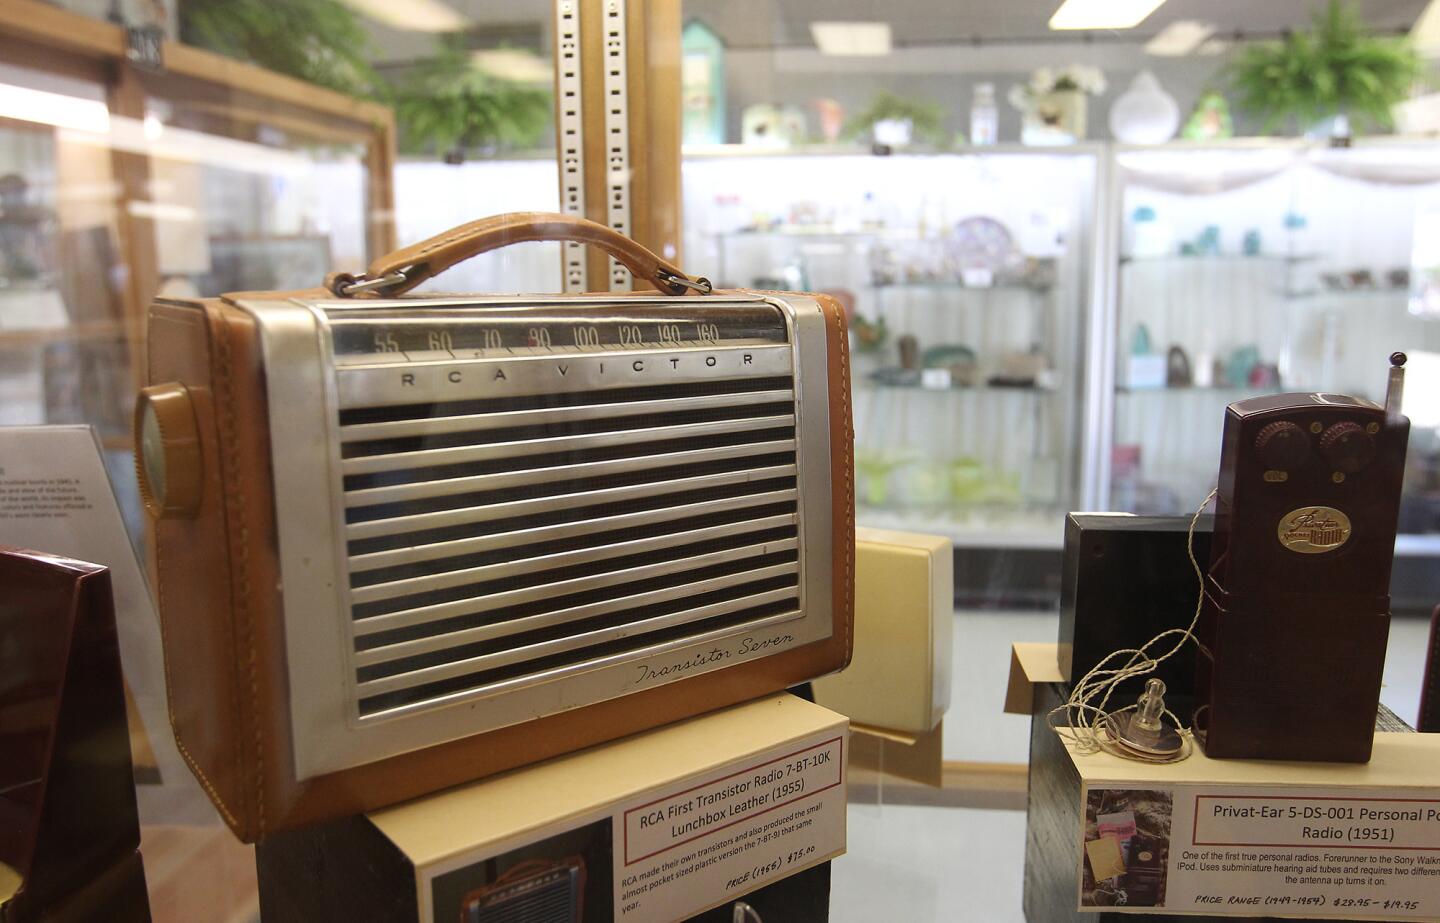 Collector rescues old radios